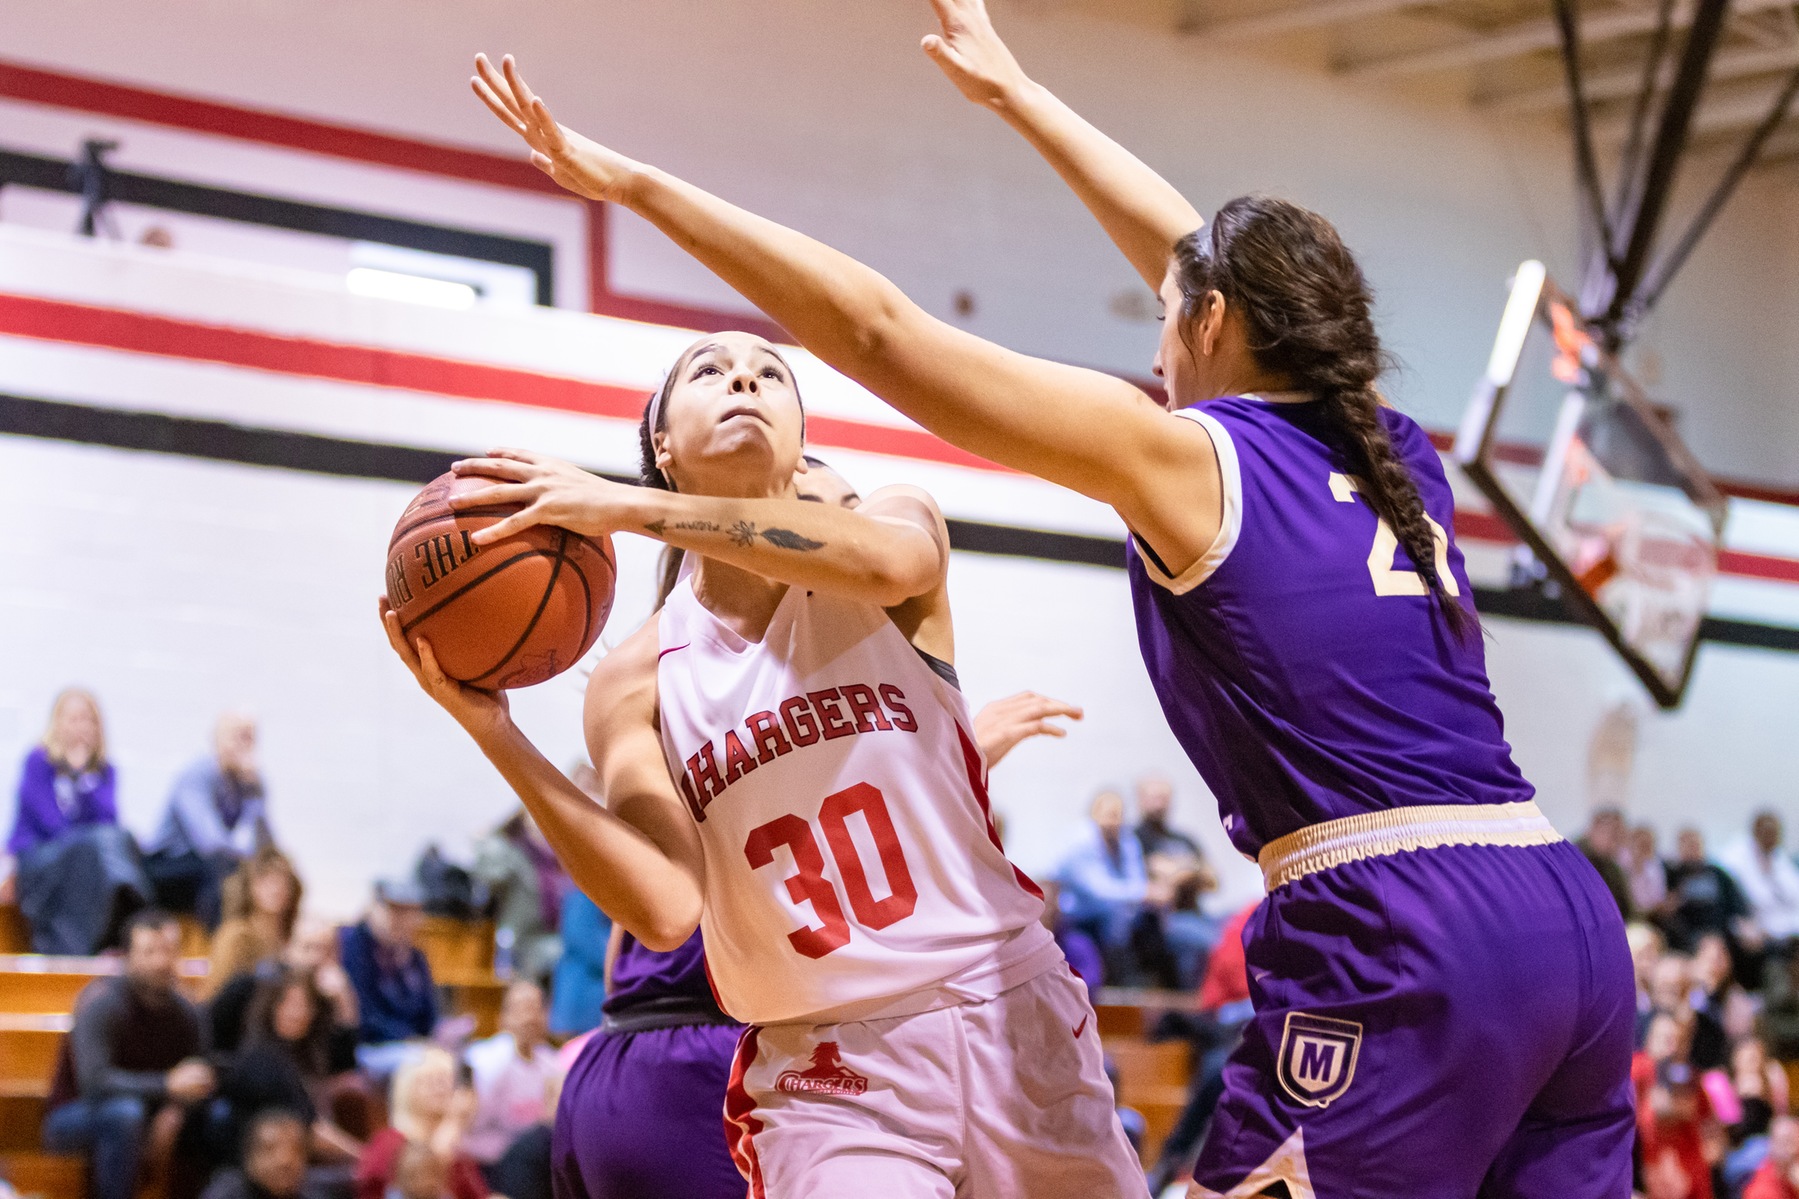 LOW SCORING AFFAIR SEES BEARS DEFEAT LADY CHARGERS